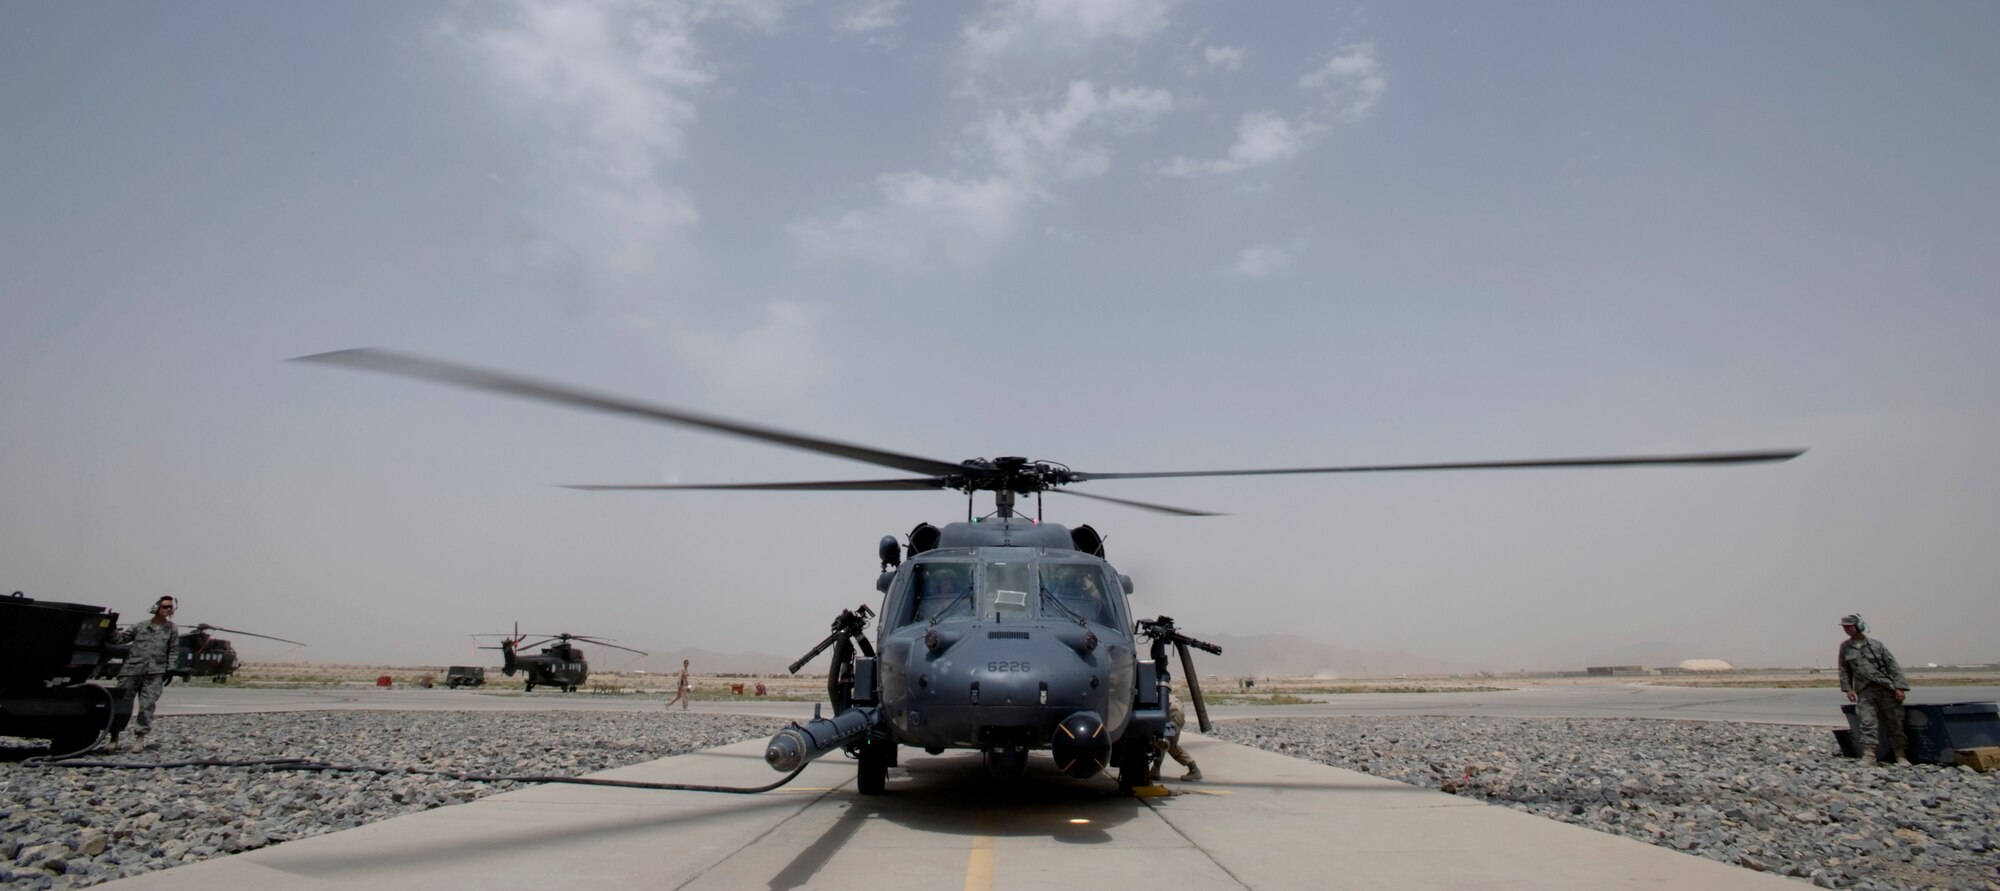 KANDAHAR AIR BASE, Afghanistan --  An HH-60 Pave Hawk lands at Kandahar Air Field, Afghanistan after a flight to test mission readiness after preventative maintenance. The Pave Hawk, as well as crews who fly it and maintain it are assigned to the 305th Expeditionary Rescue Squadron, an Air Force Reserve unit deployed from Davis-Monthan Air Force Base, Ariz. (U.S. Air Force photo by Master Sgt Keith Brown)
